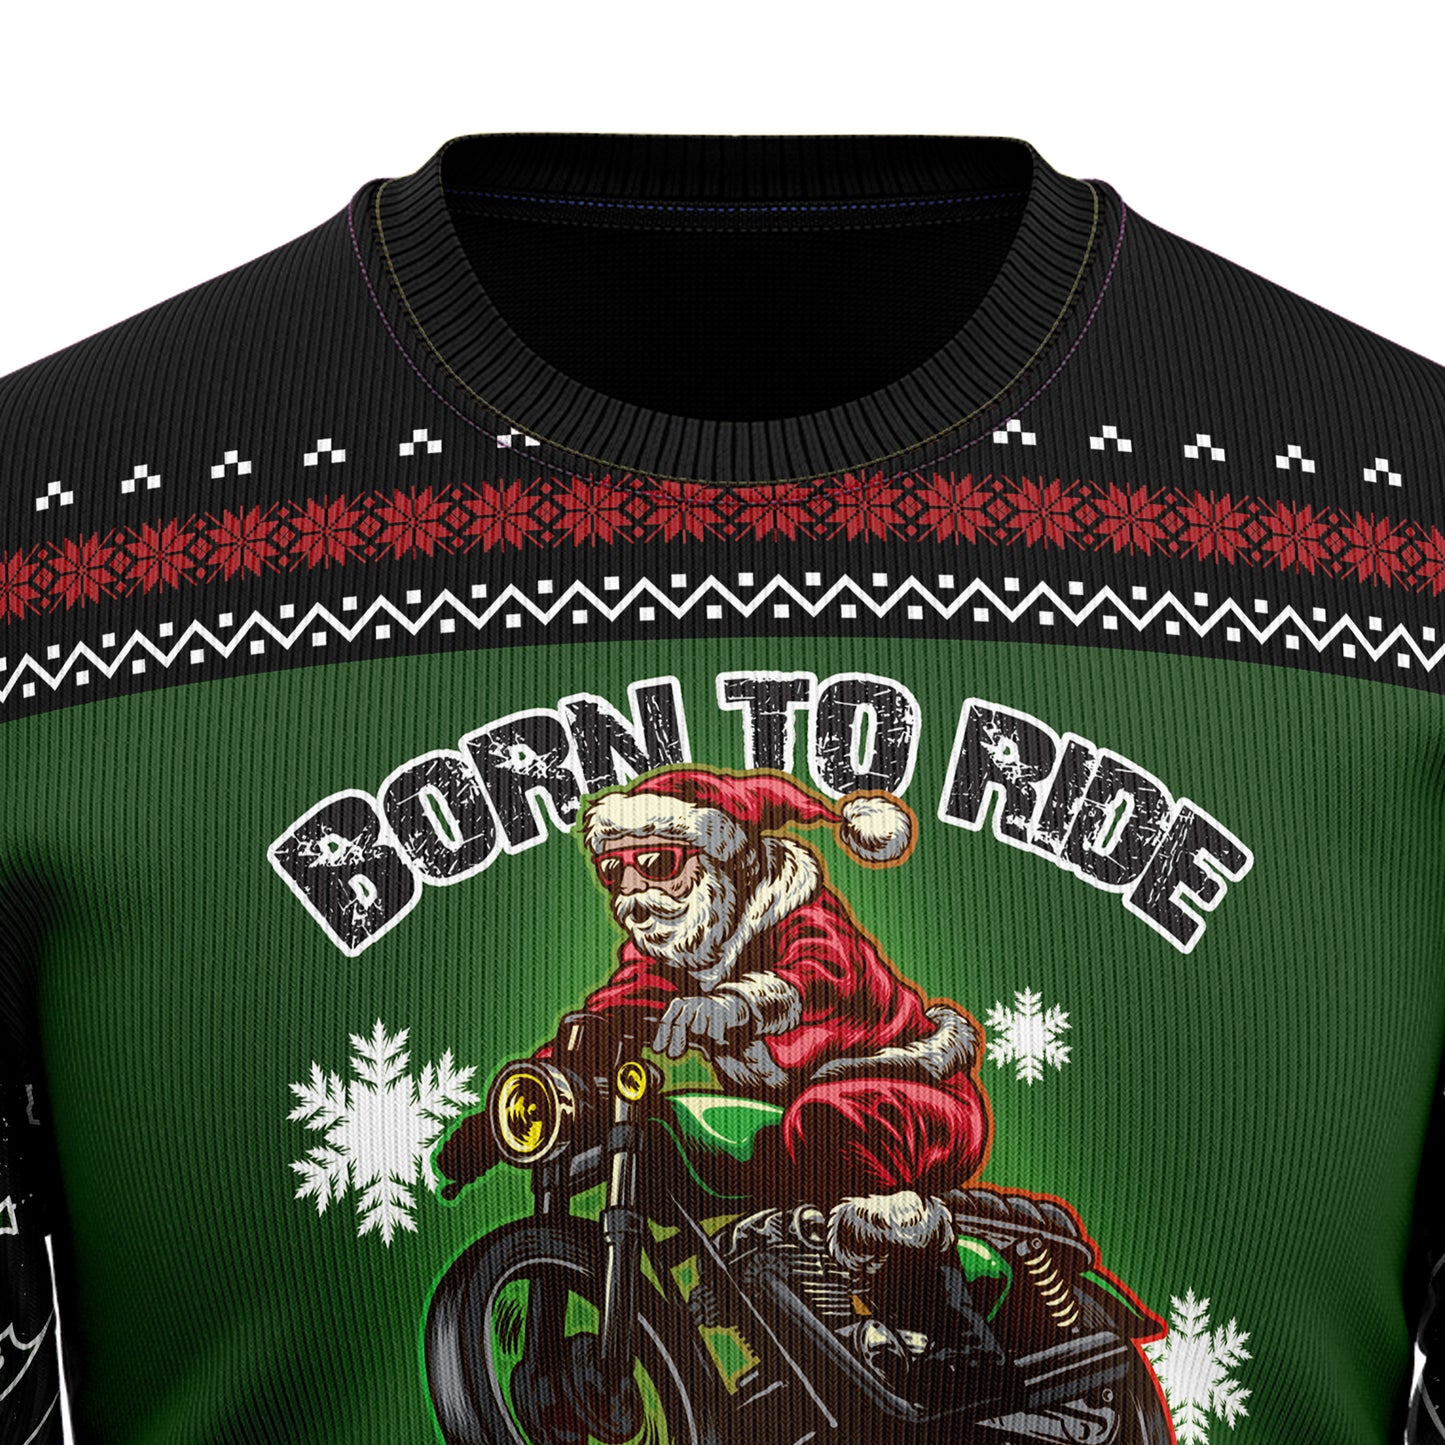 Santa Born To Ride TY210 Ugly Christmas Sweater